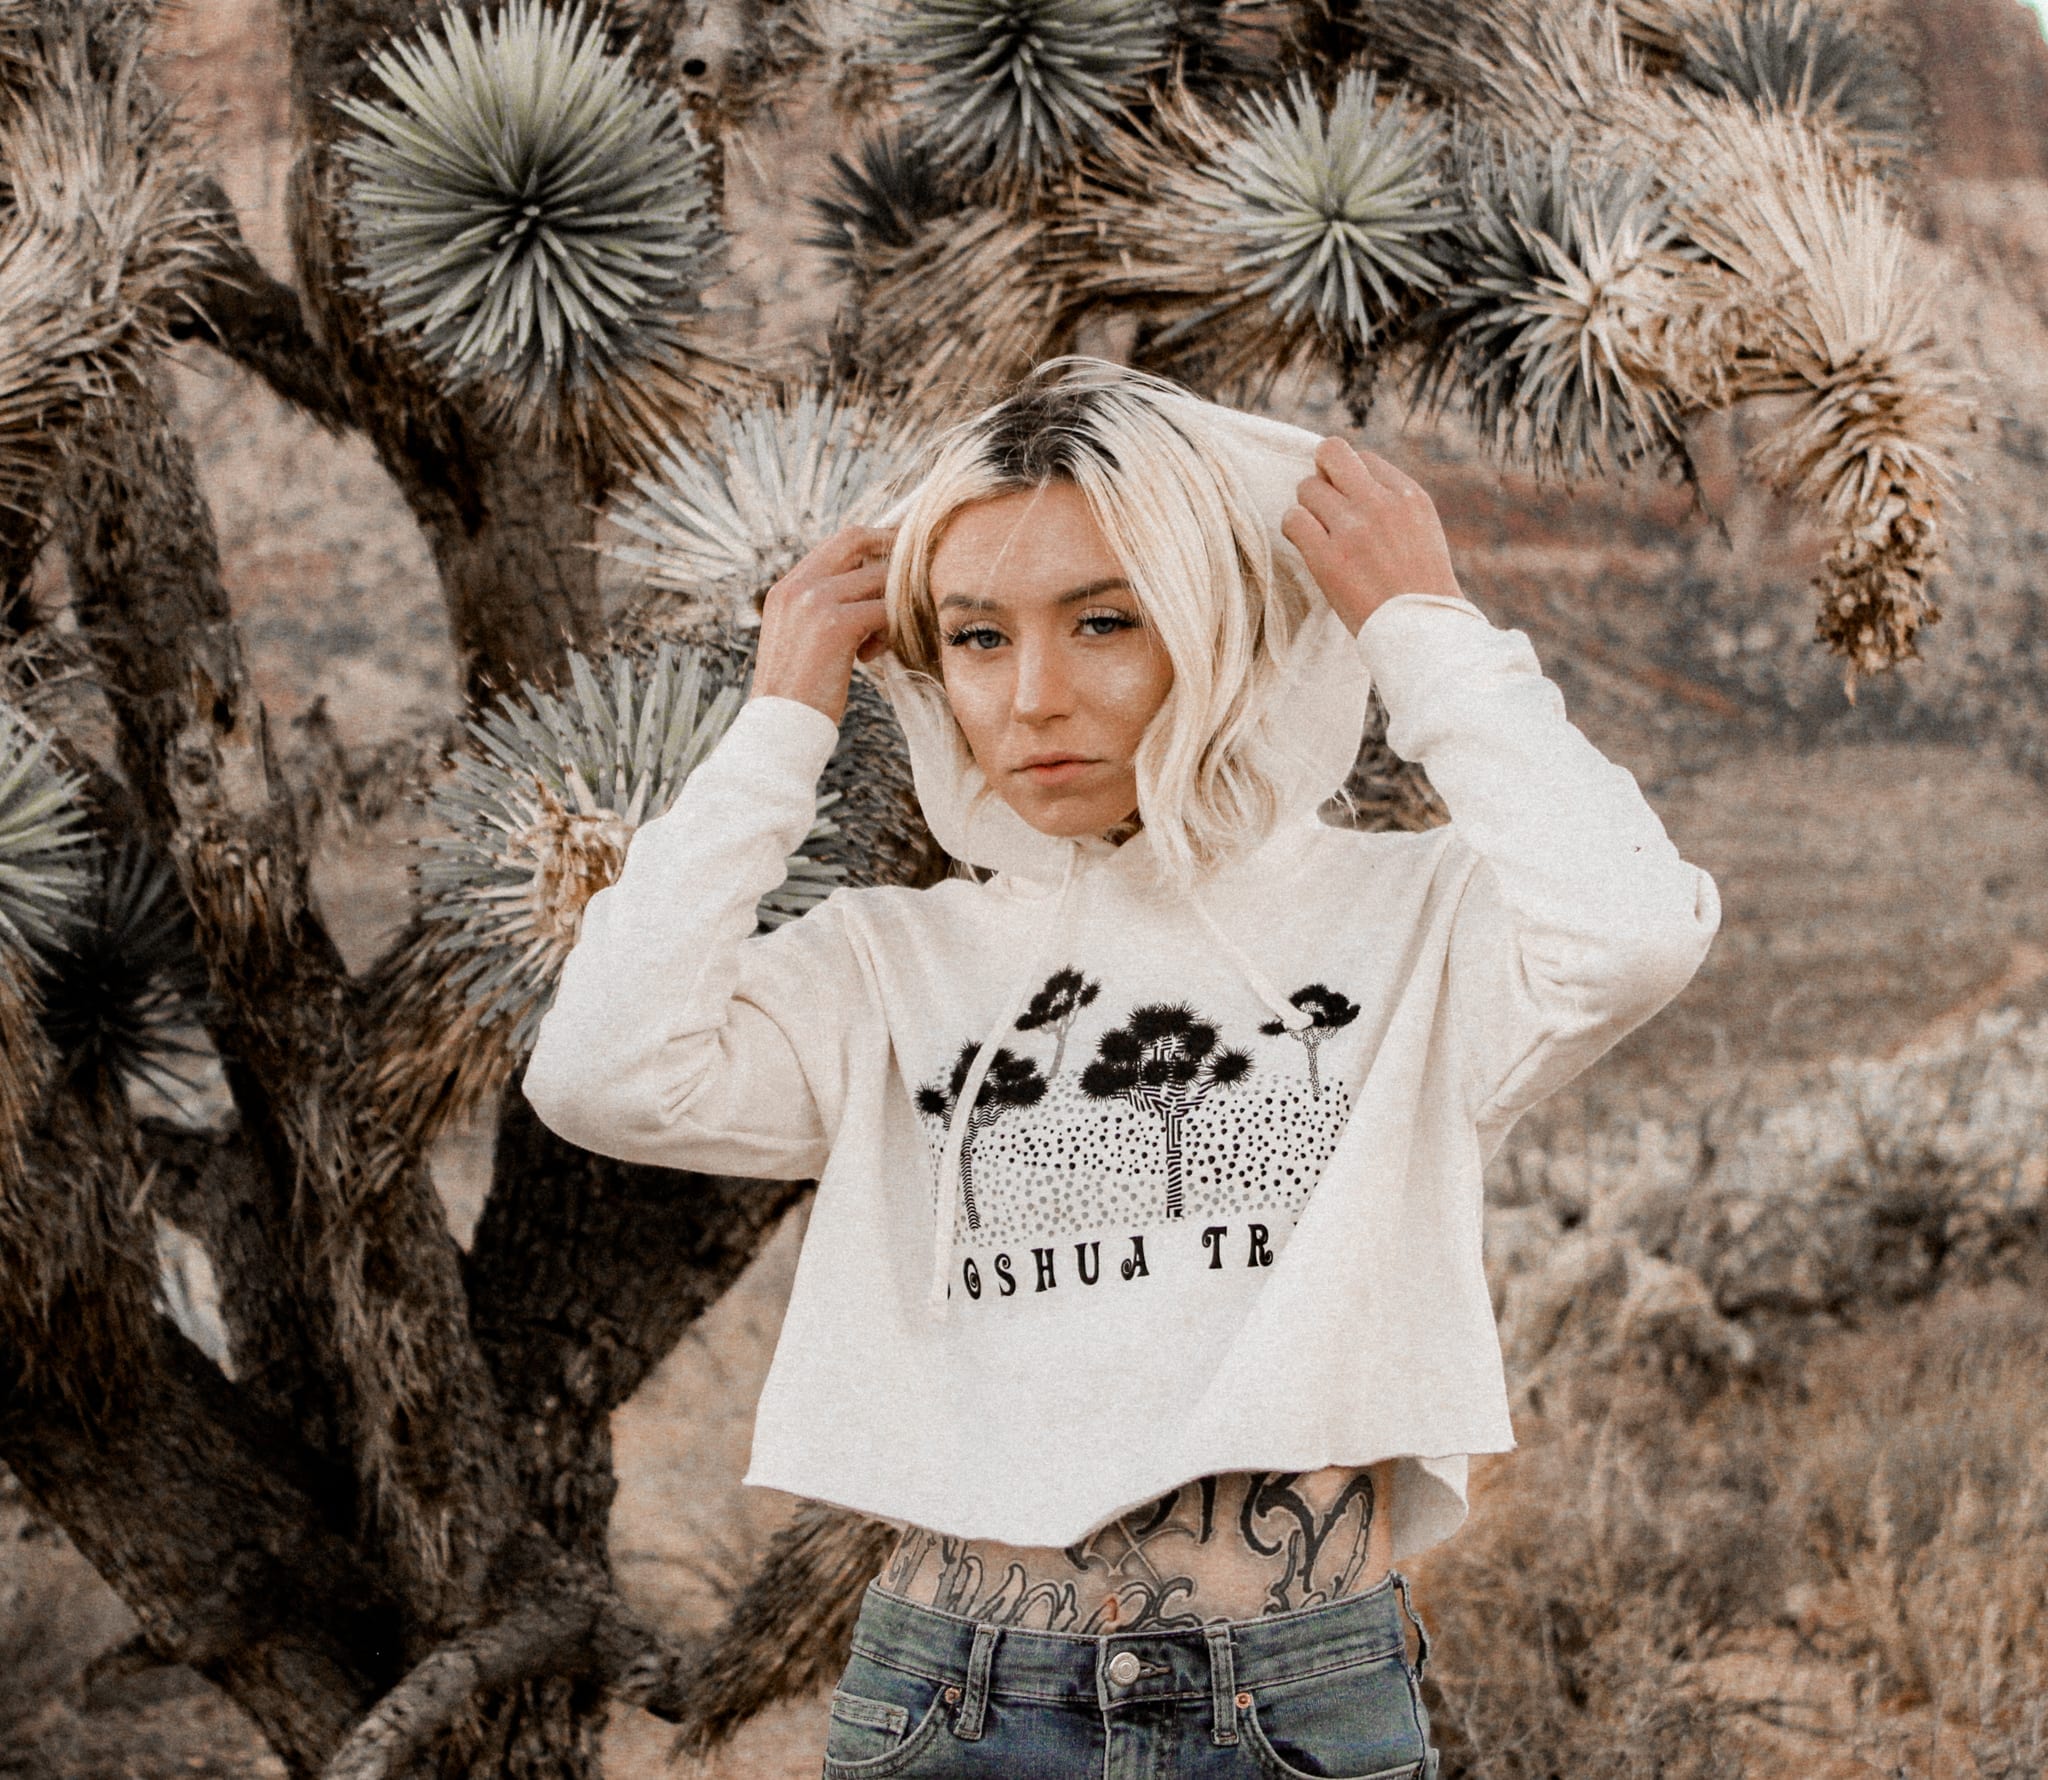 female standing next to a joshua tree with mountains in the background wearing a joshua tree hoodie